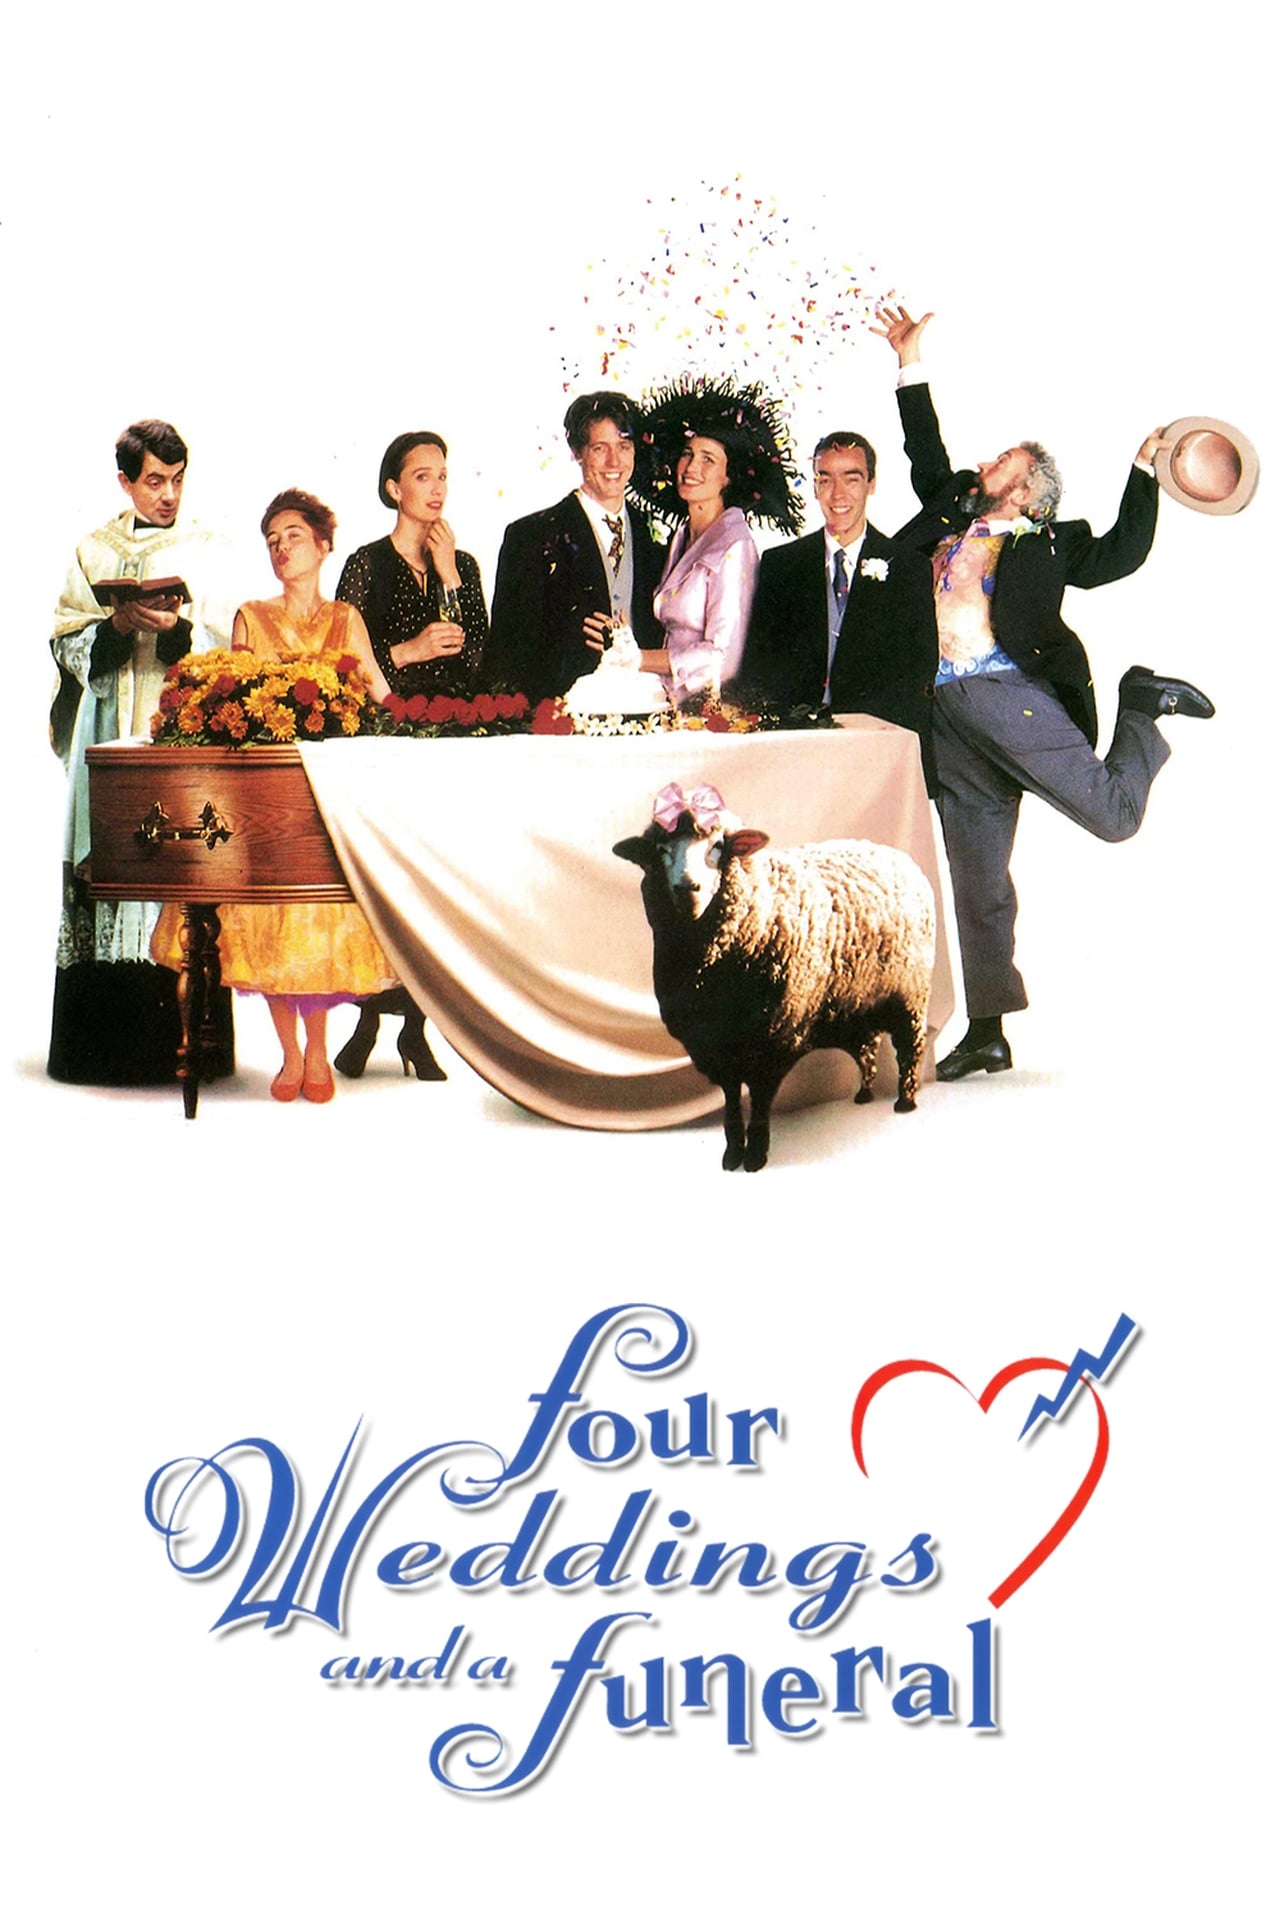 Four Weddings and a Funeral (1994) 192Kbps 23.976Fps 48Khz 2.0Ch DigitalTV Turkish Audio TAC